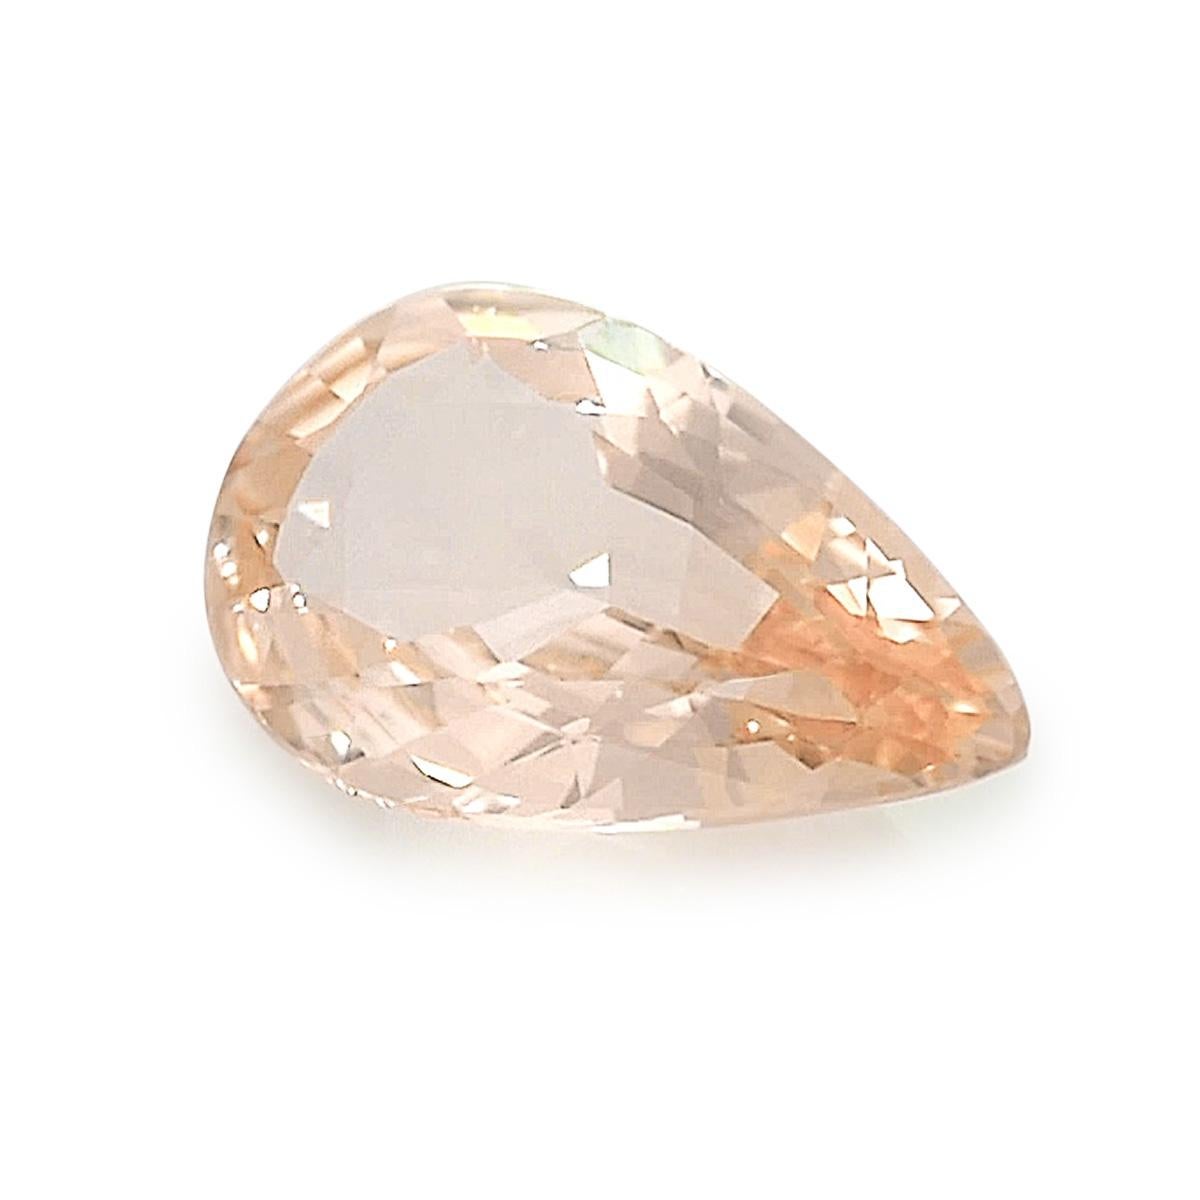 Delve into the allure of 1.16 carats Natural Peach Sapphire, a gem with distinctive qualities. Its pear shape, measuring 9.12 x 5.63 x 3.11 mm, accentuates its unique elegance. The Brilliant/Step cut adds brilliance, creating a mesmerizing interplay